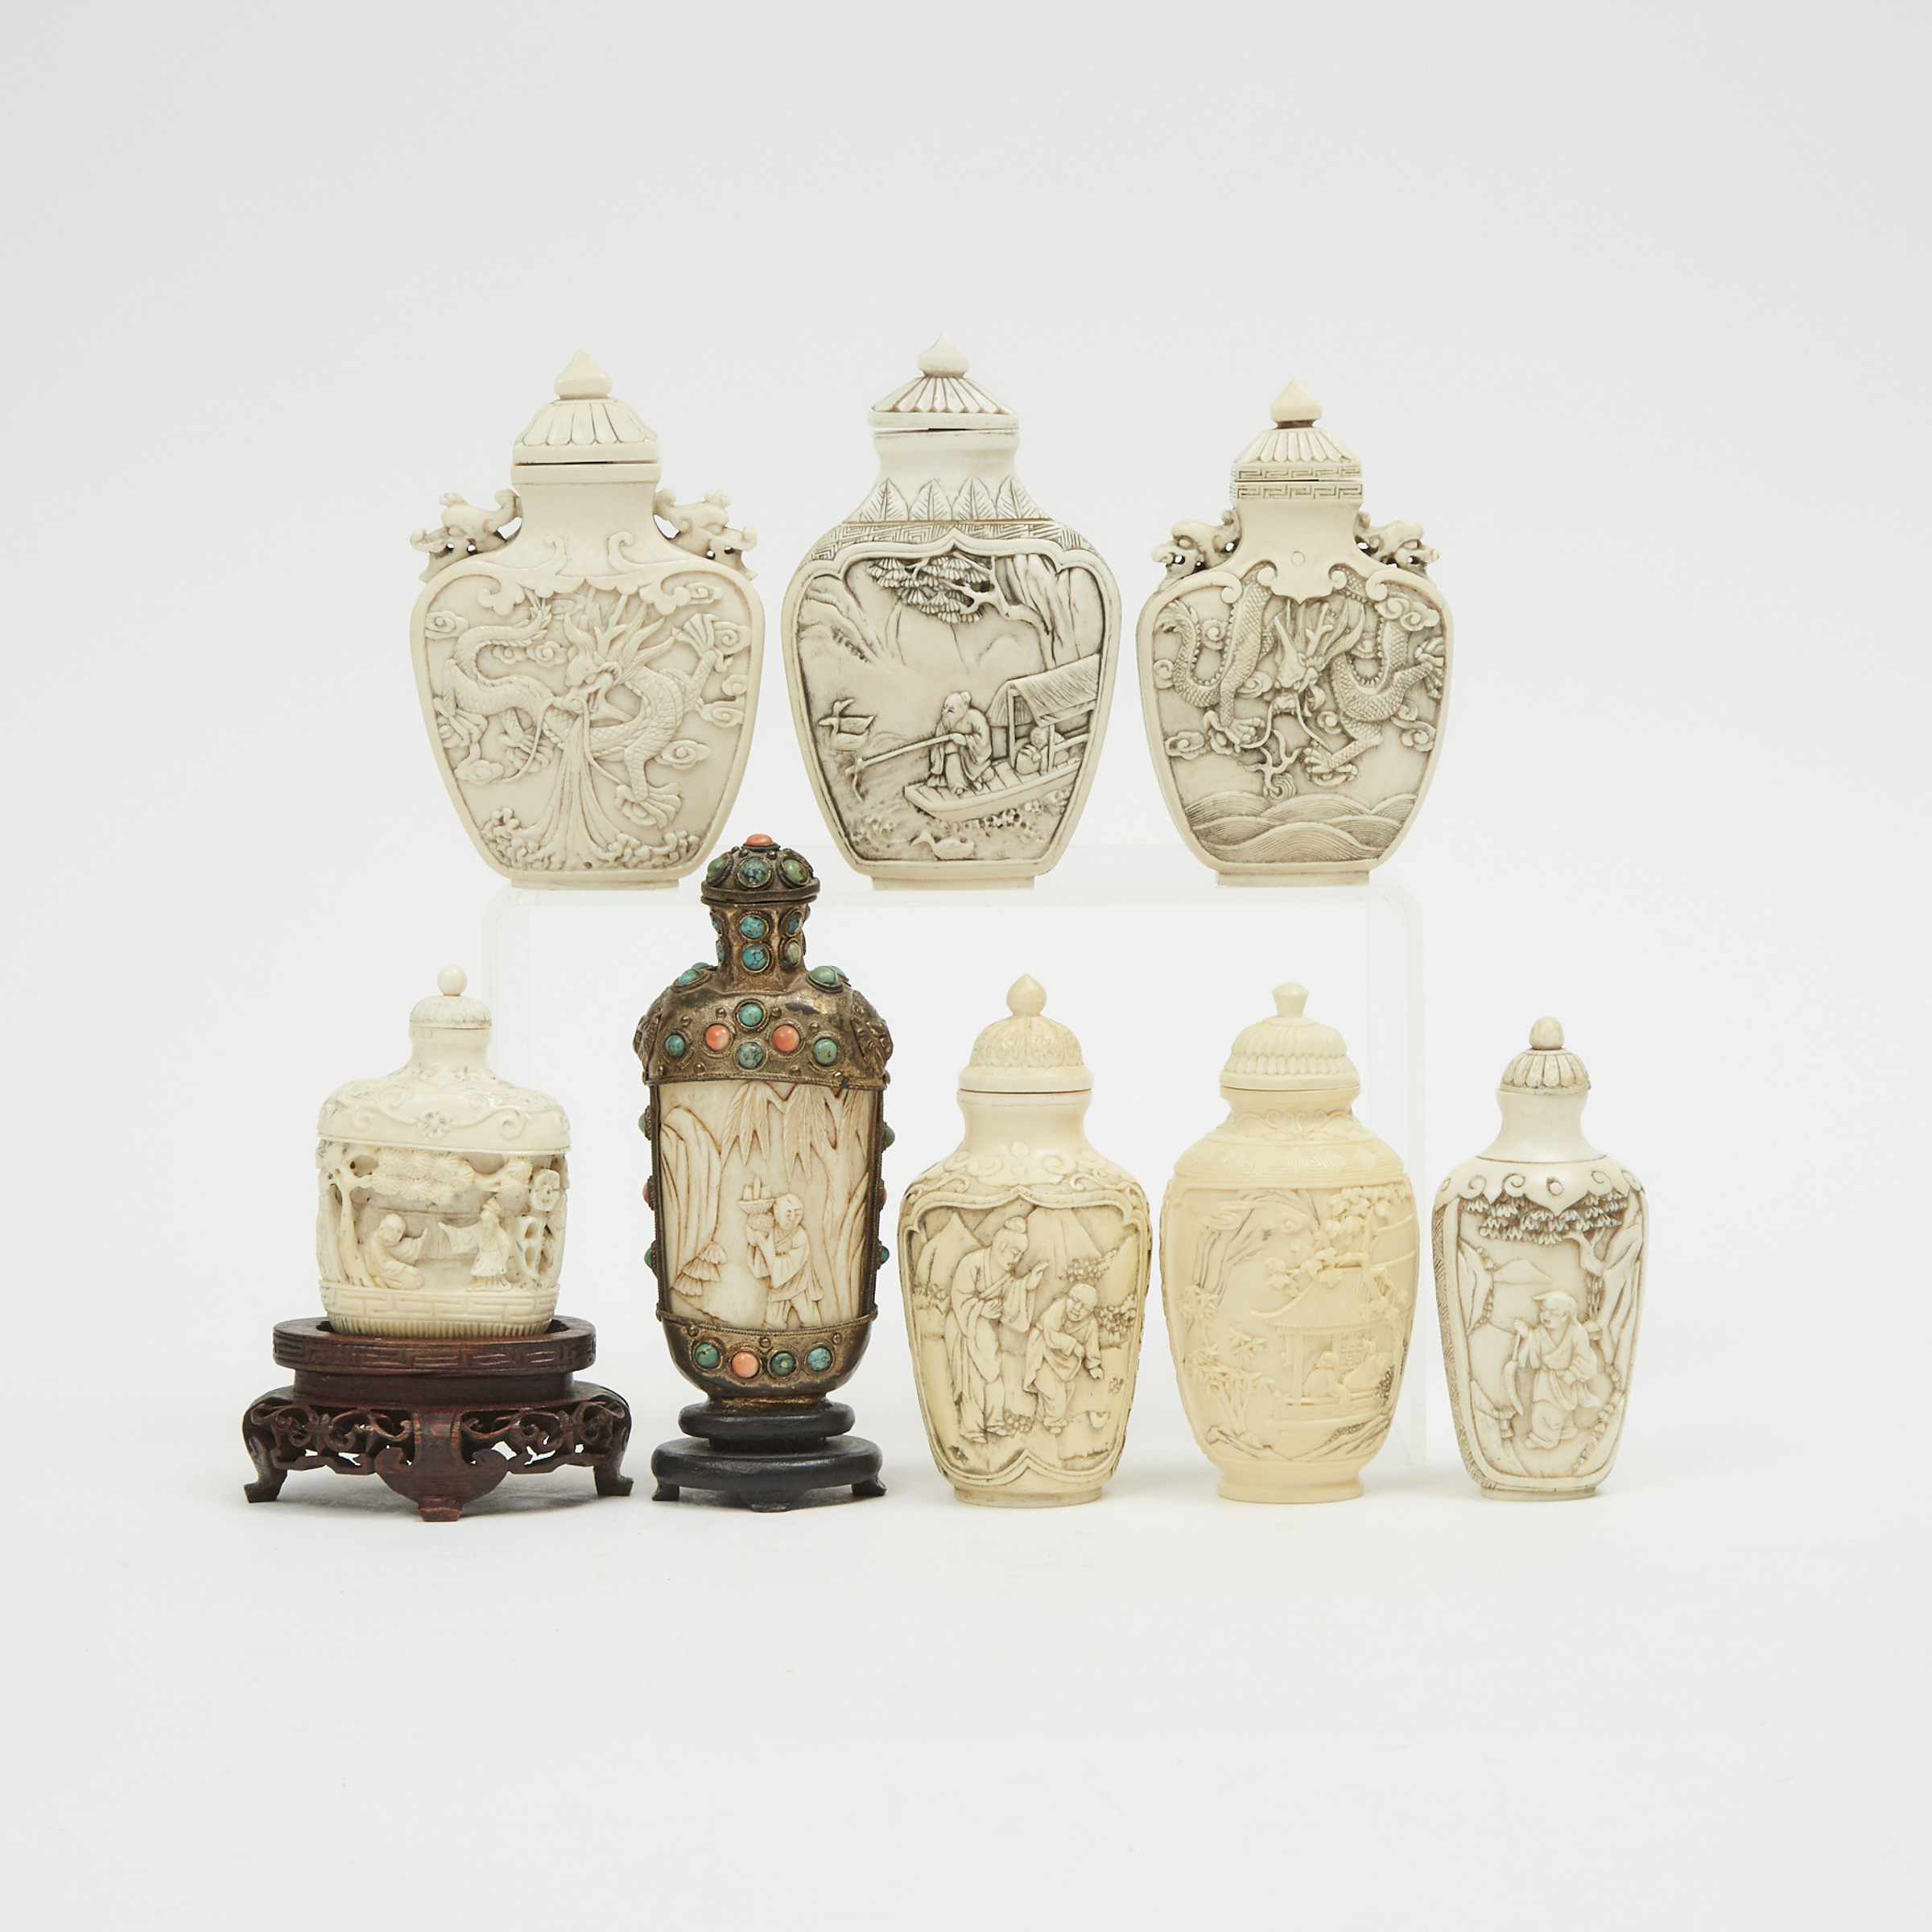 A Group of Eight Ivory and Bone Carved Snuff Bottles